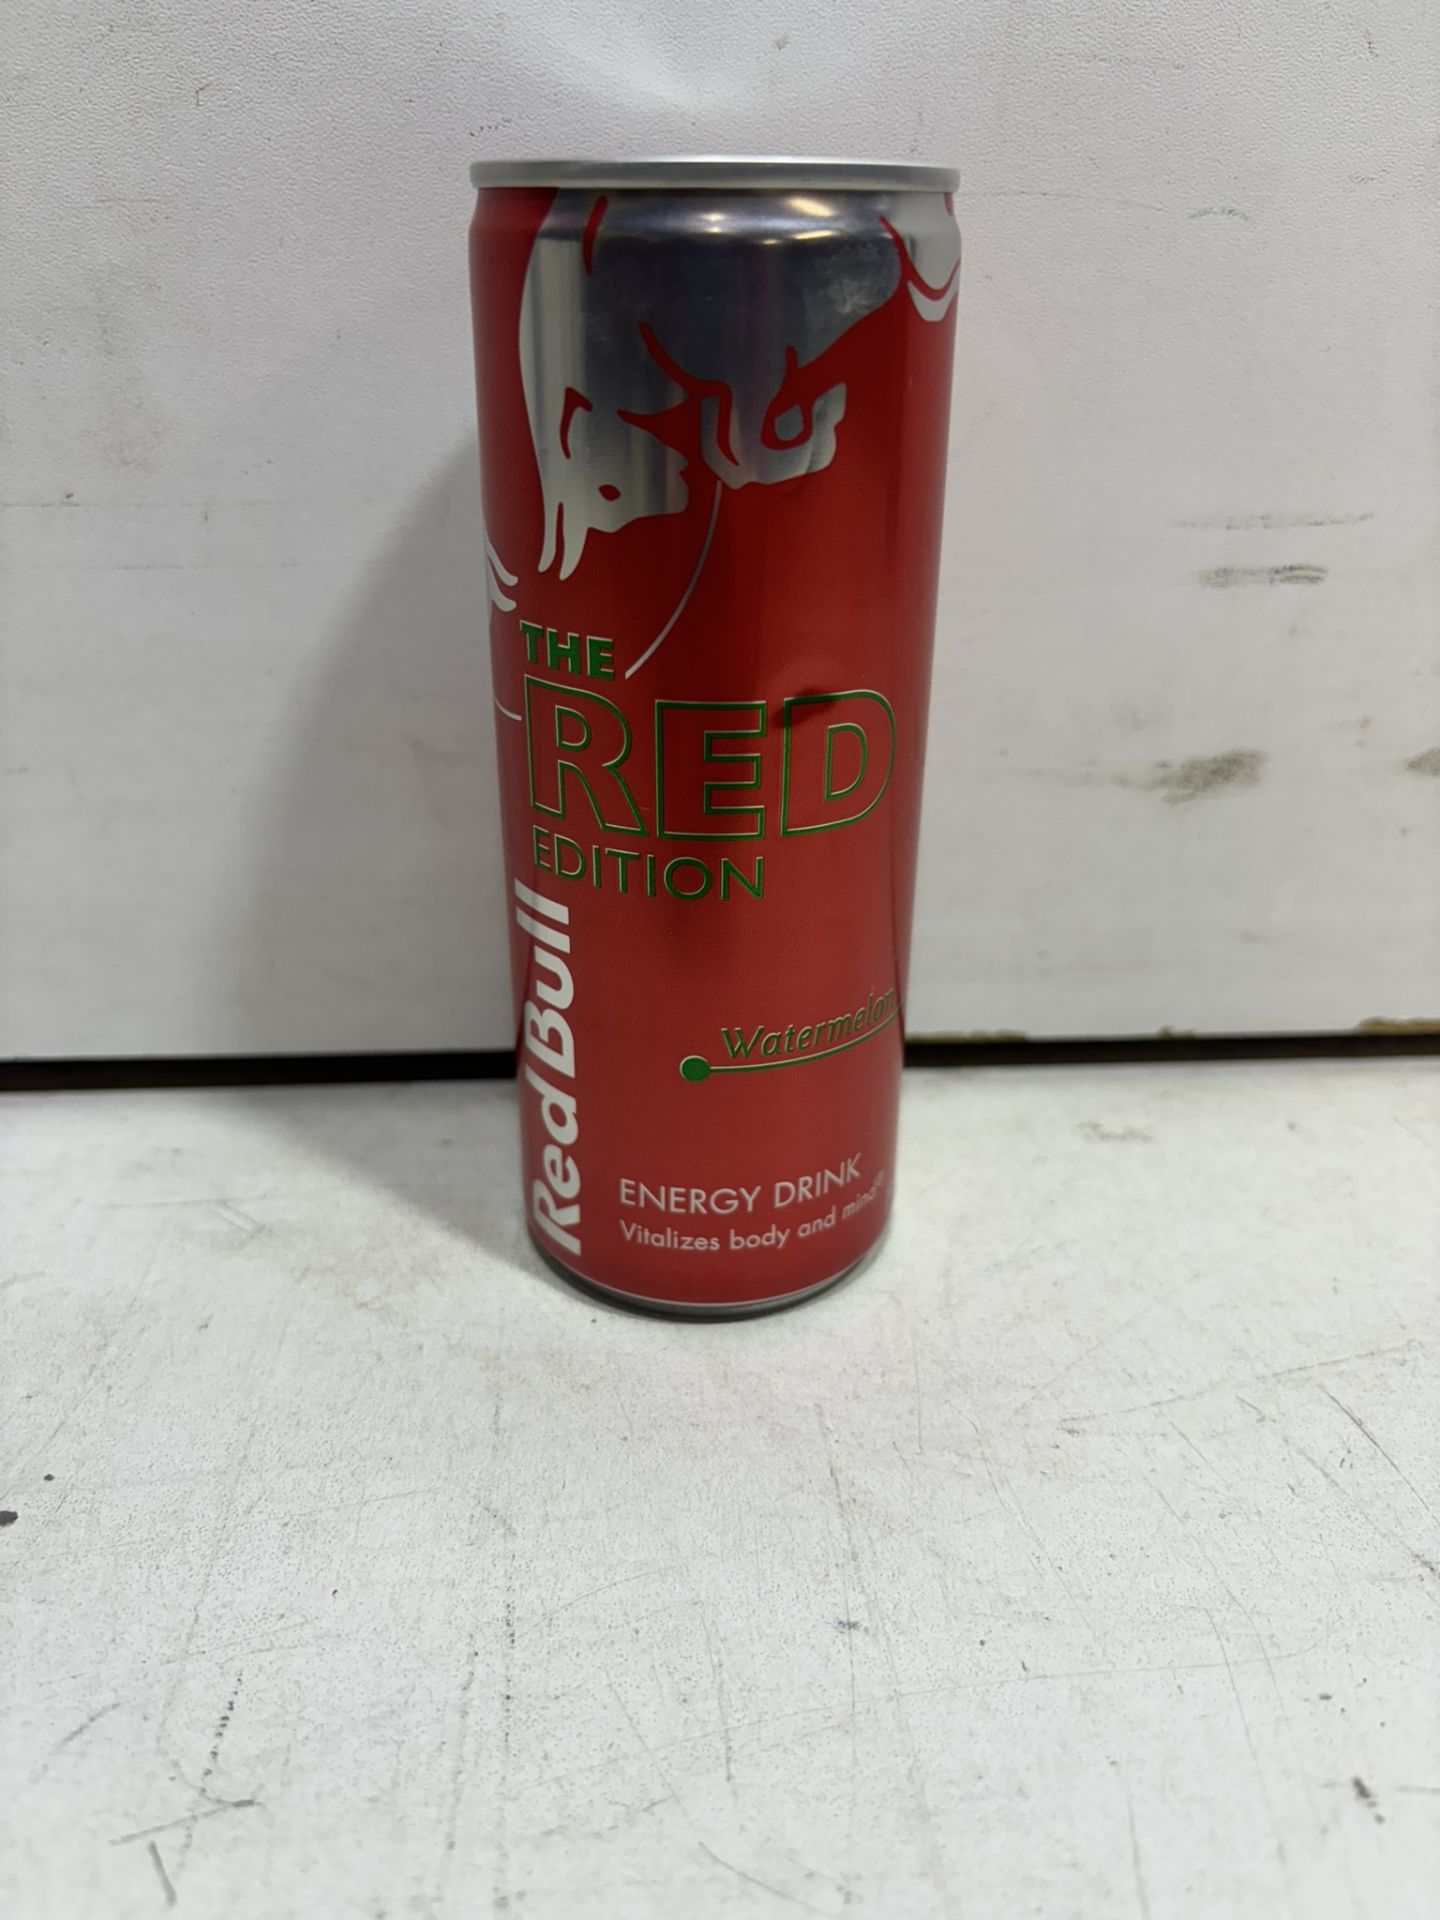 60 X Cans Of Red Bull 'The Red Edition' Watermelon Energy Drinks, 250Ml